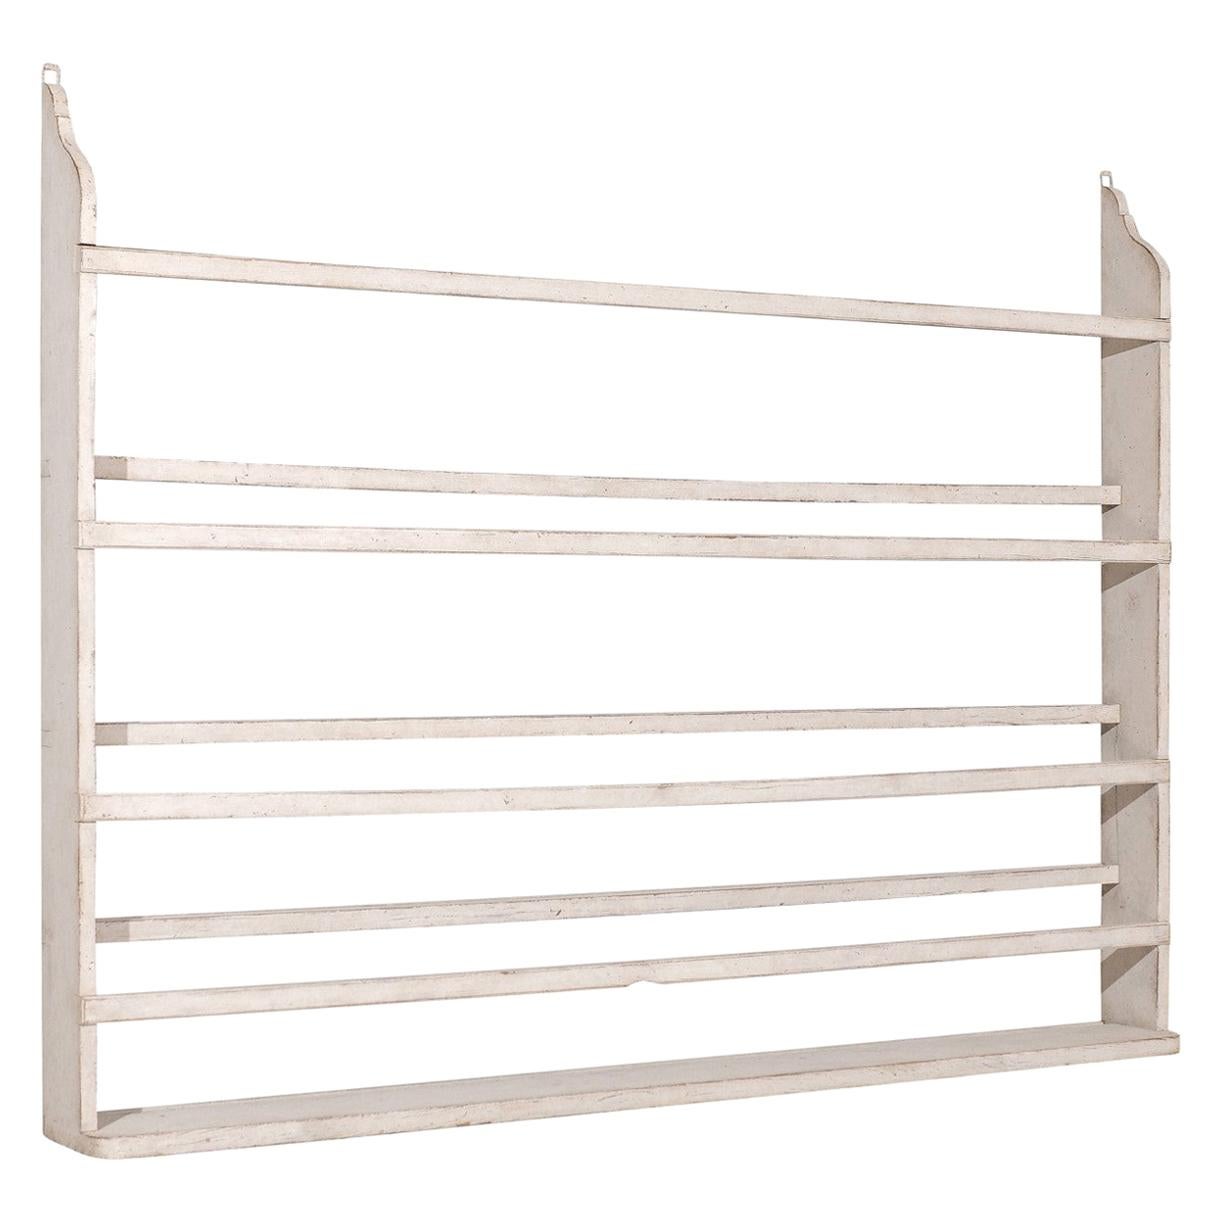 Swedish 20th Century Painted Wood Plate Rack with Distressed Painted Finish  For Sale at 1stDibs